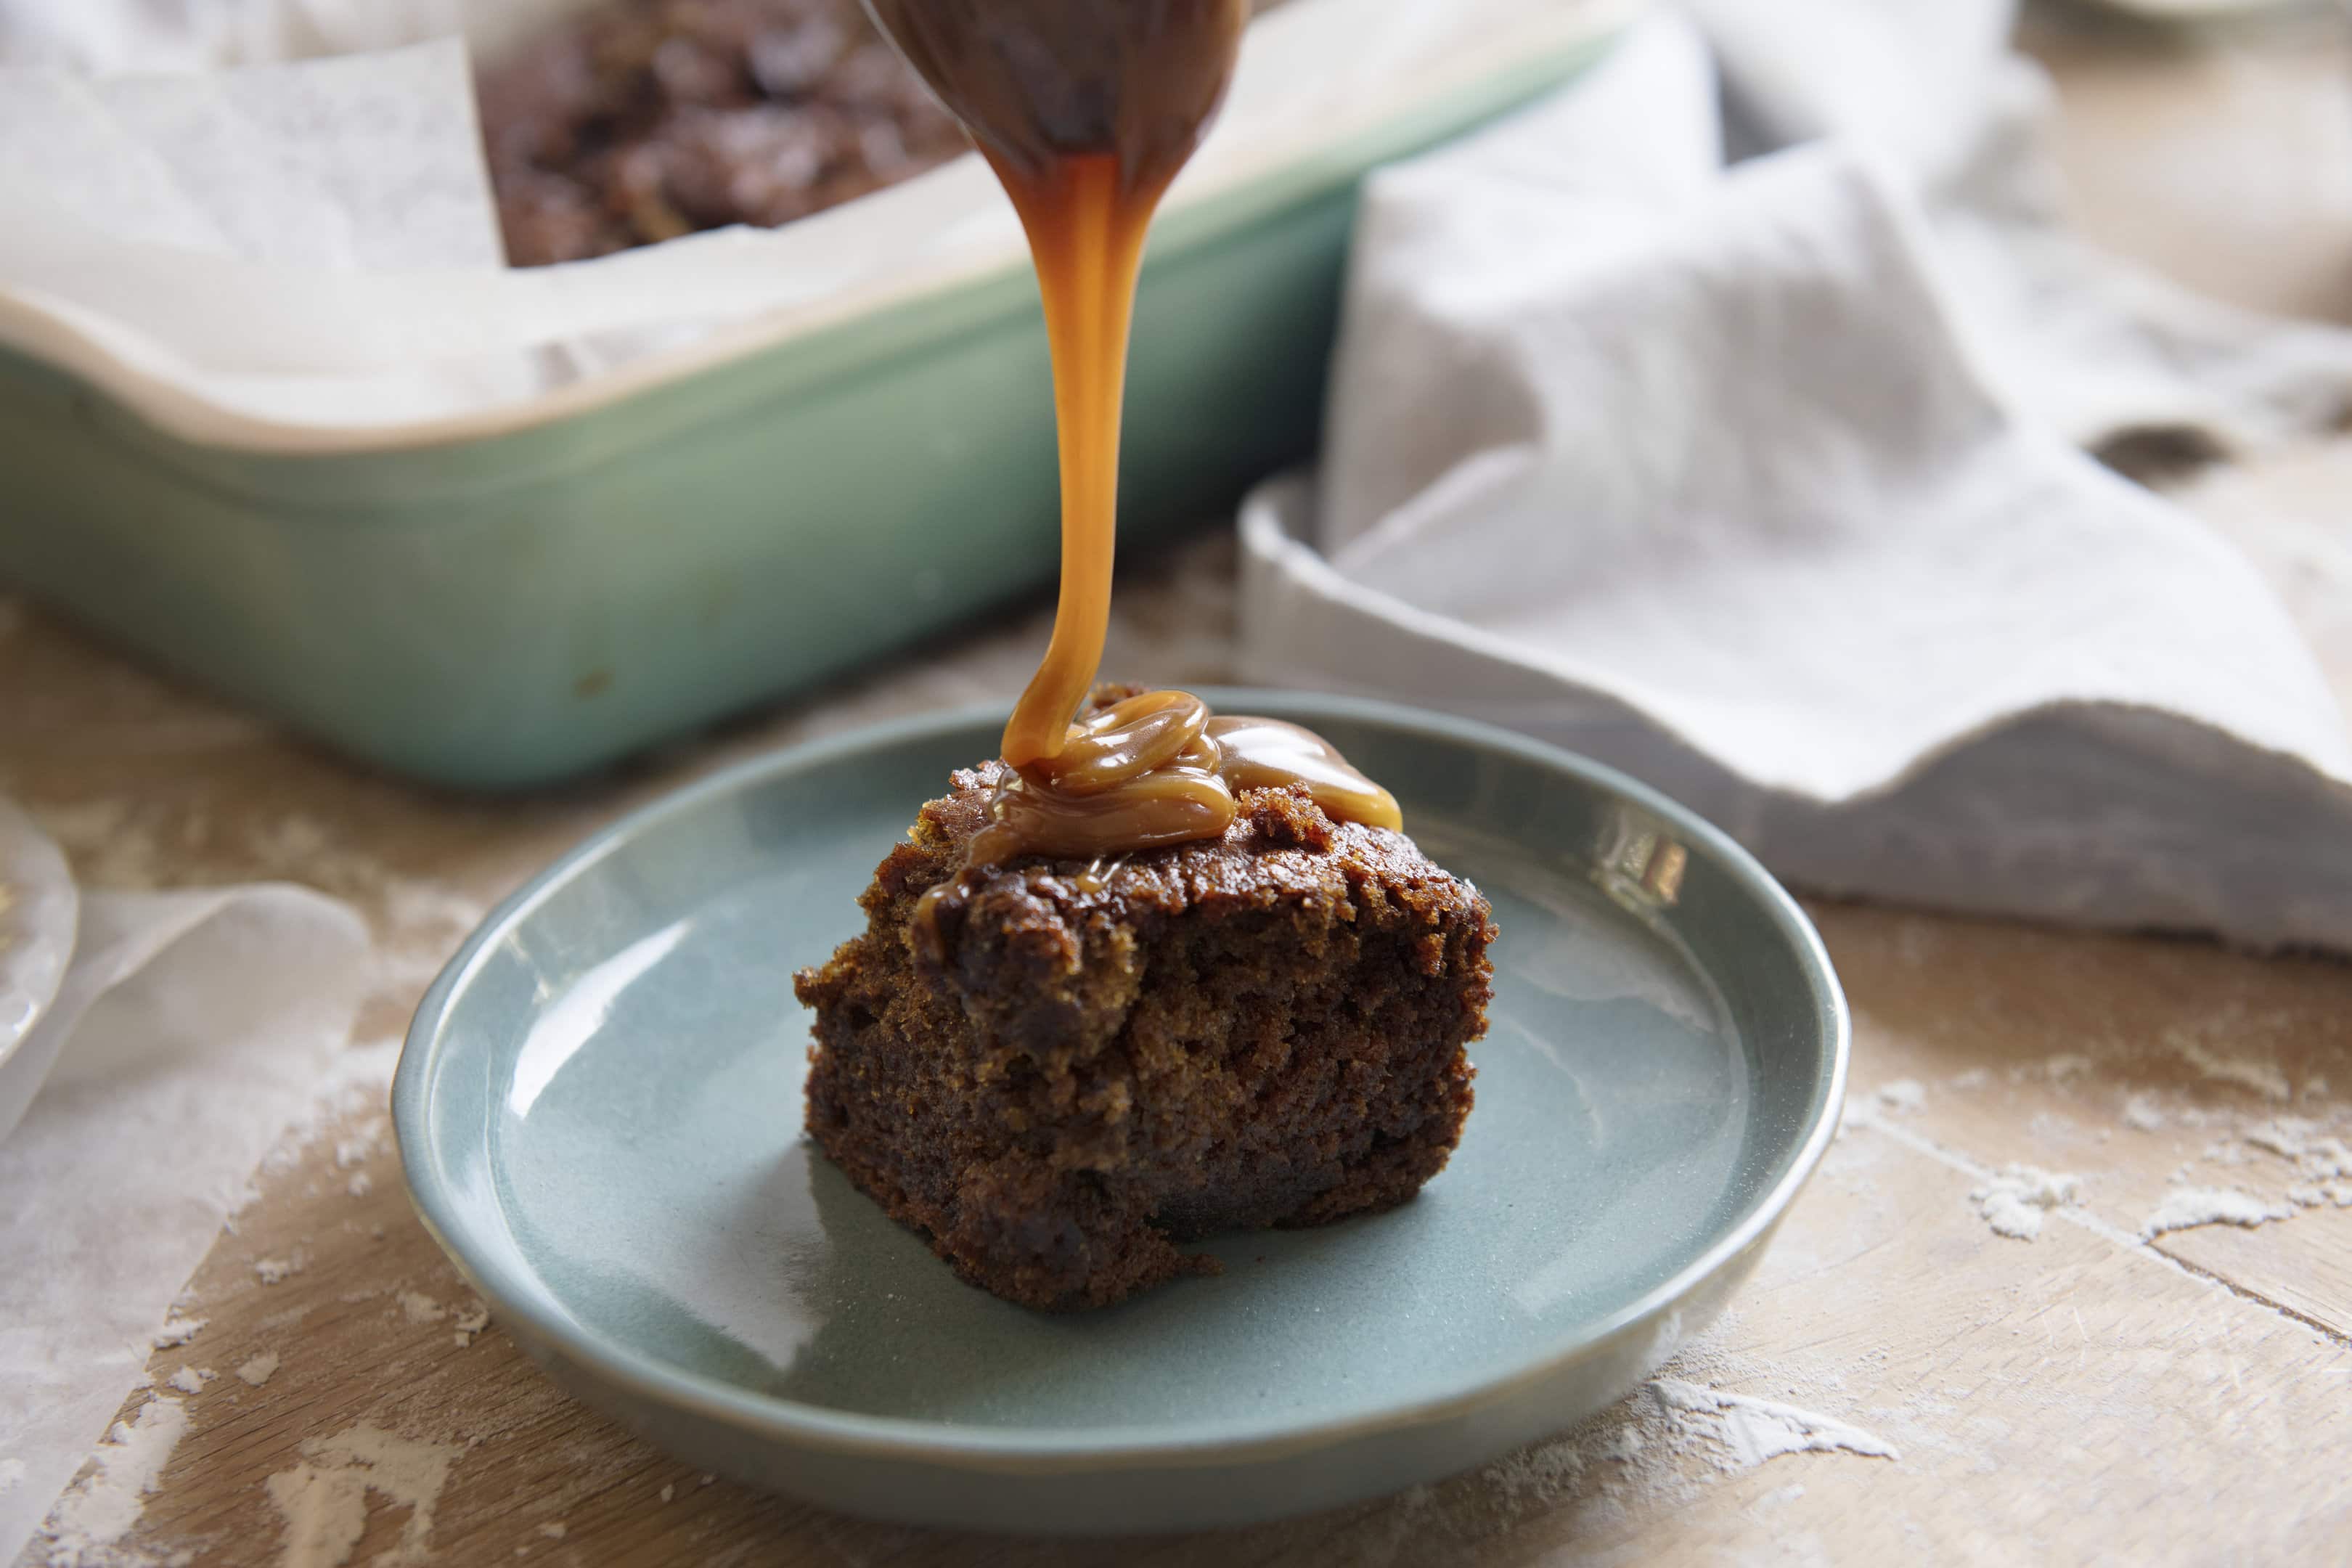 Gordon Ramsay's sticky toffee pudding with sauce